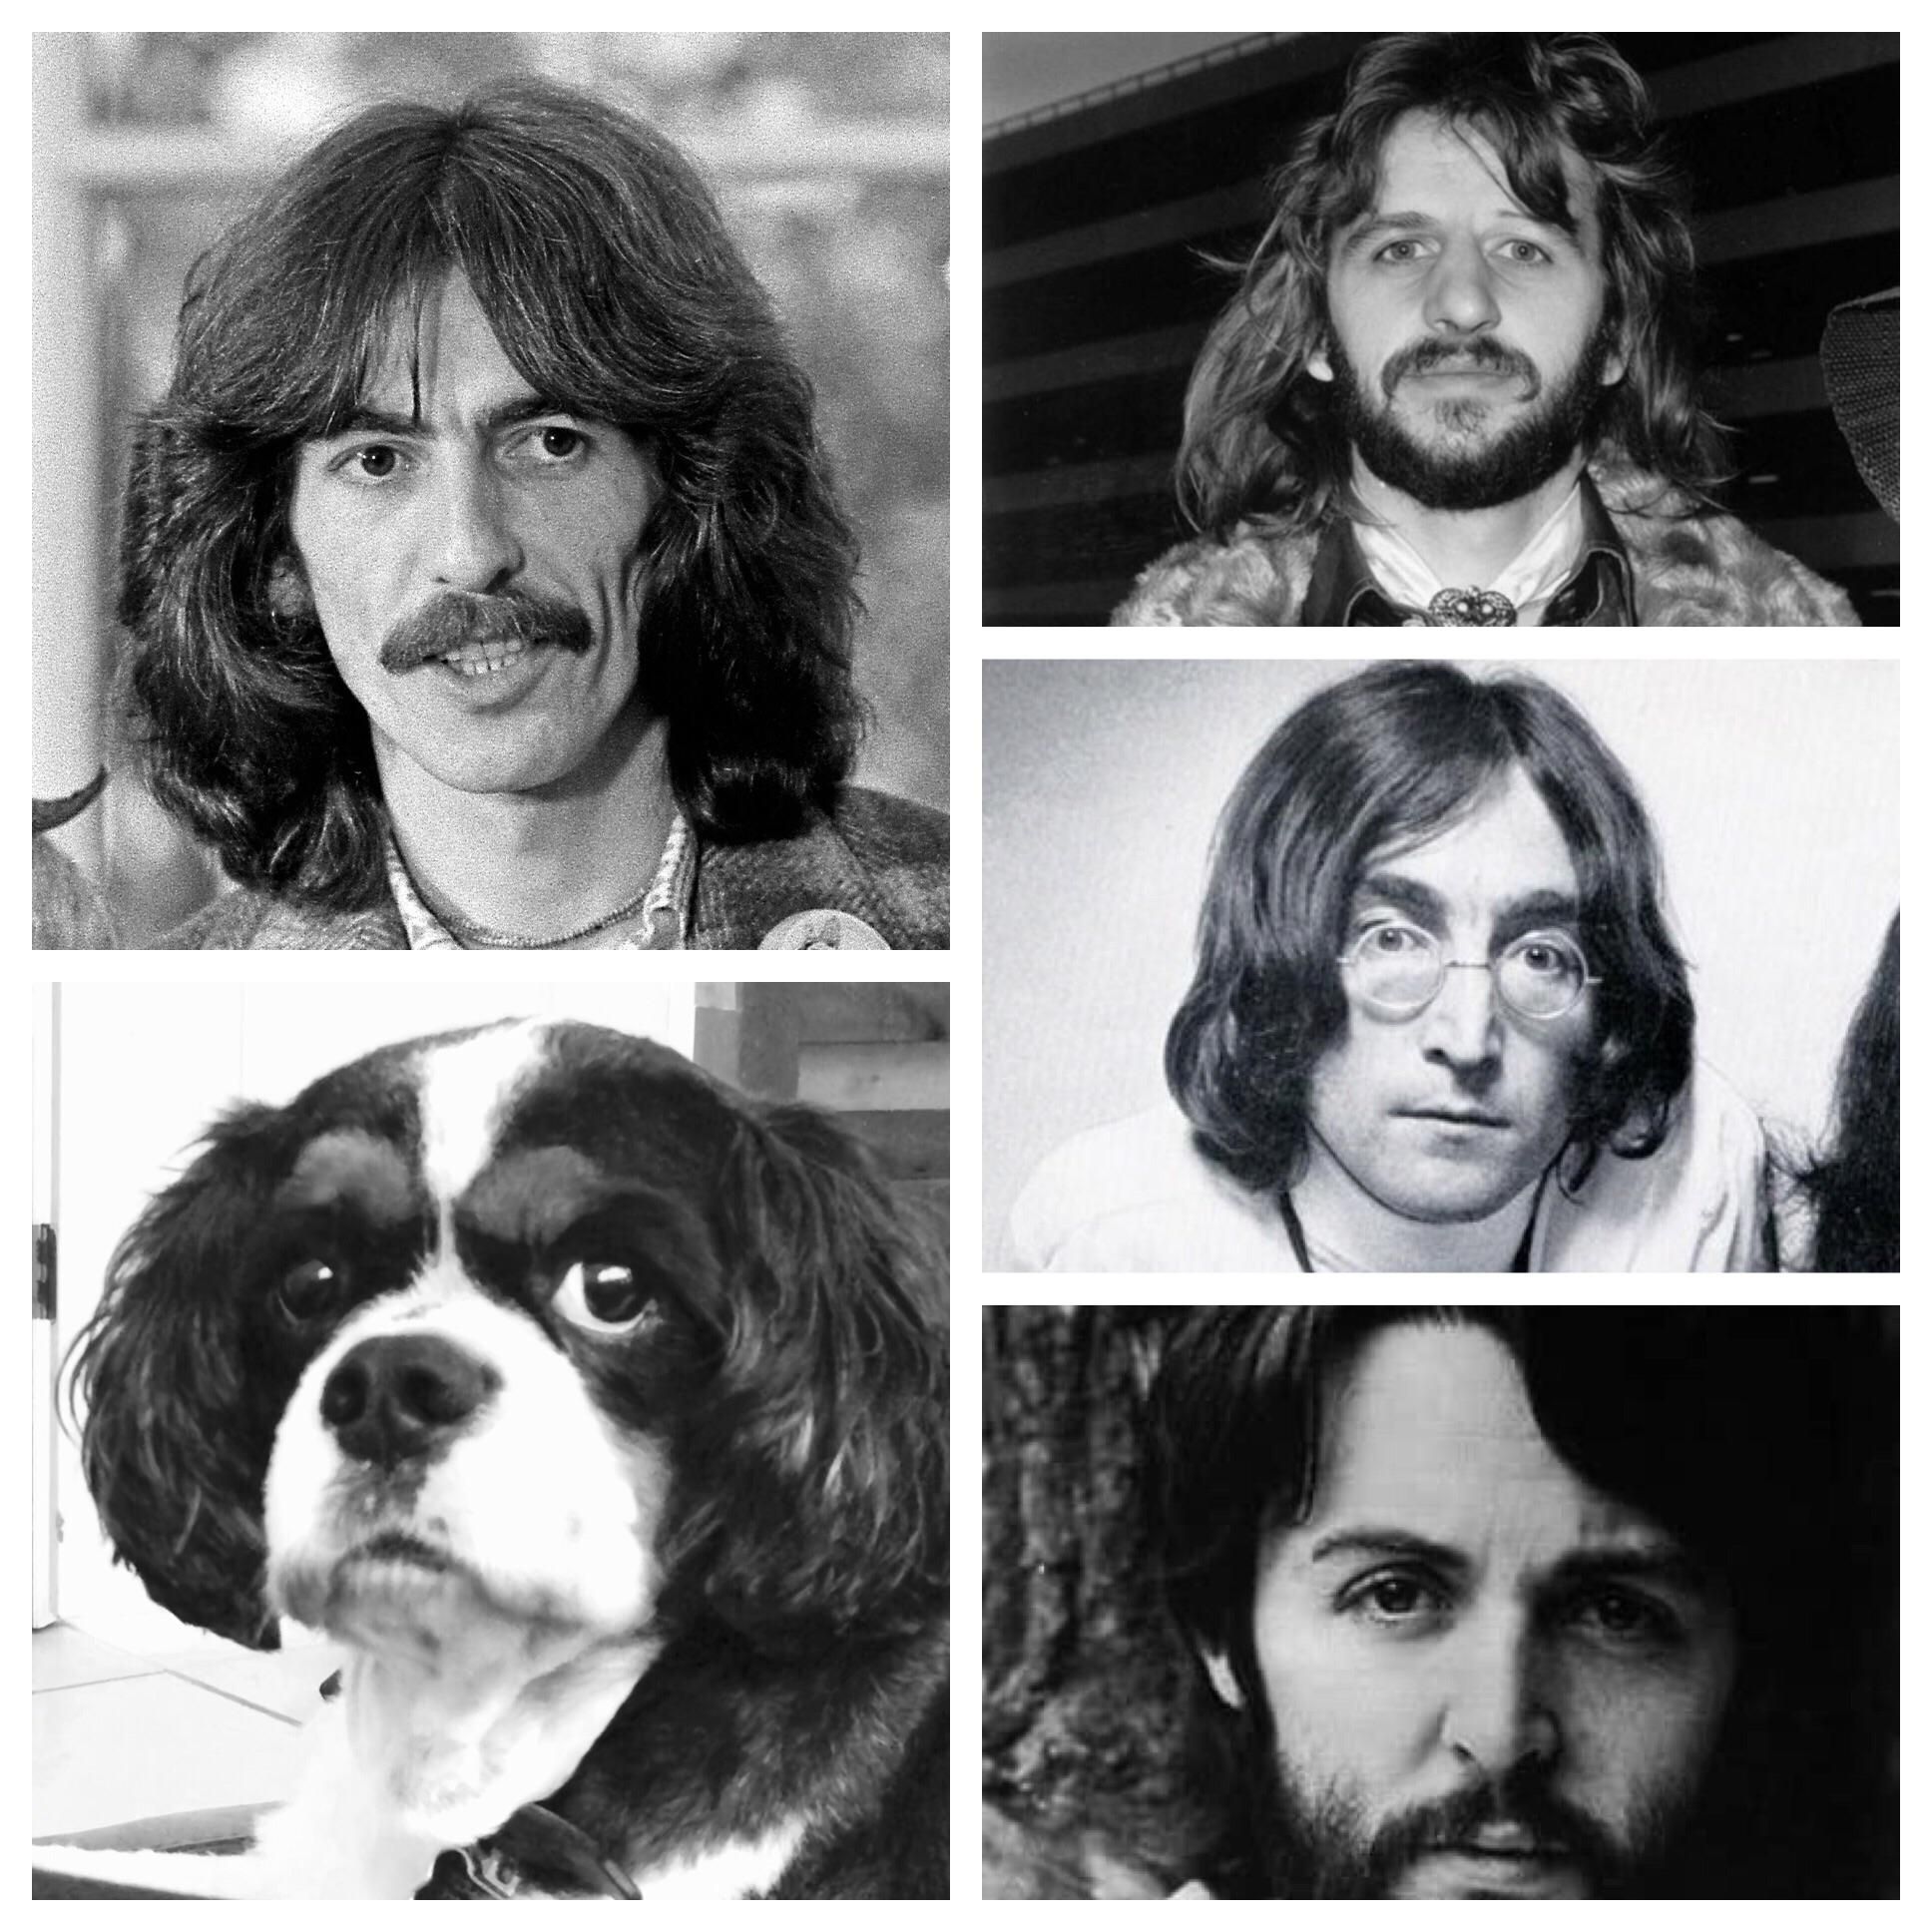 Our dog was groomed today and when I told my husband “He looks like one of the Beatles” he made this image for me.